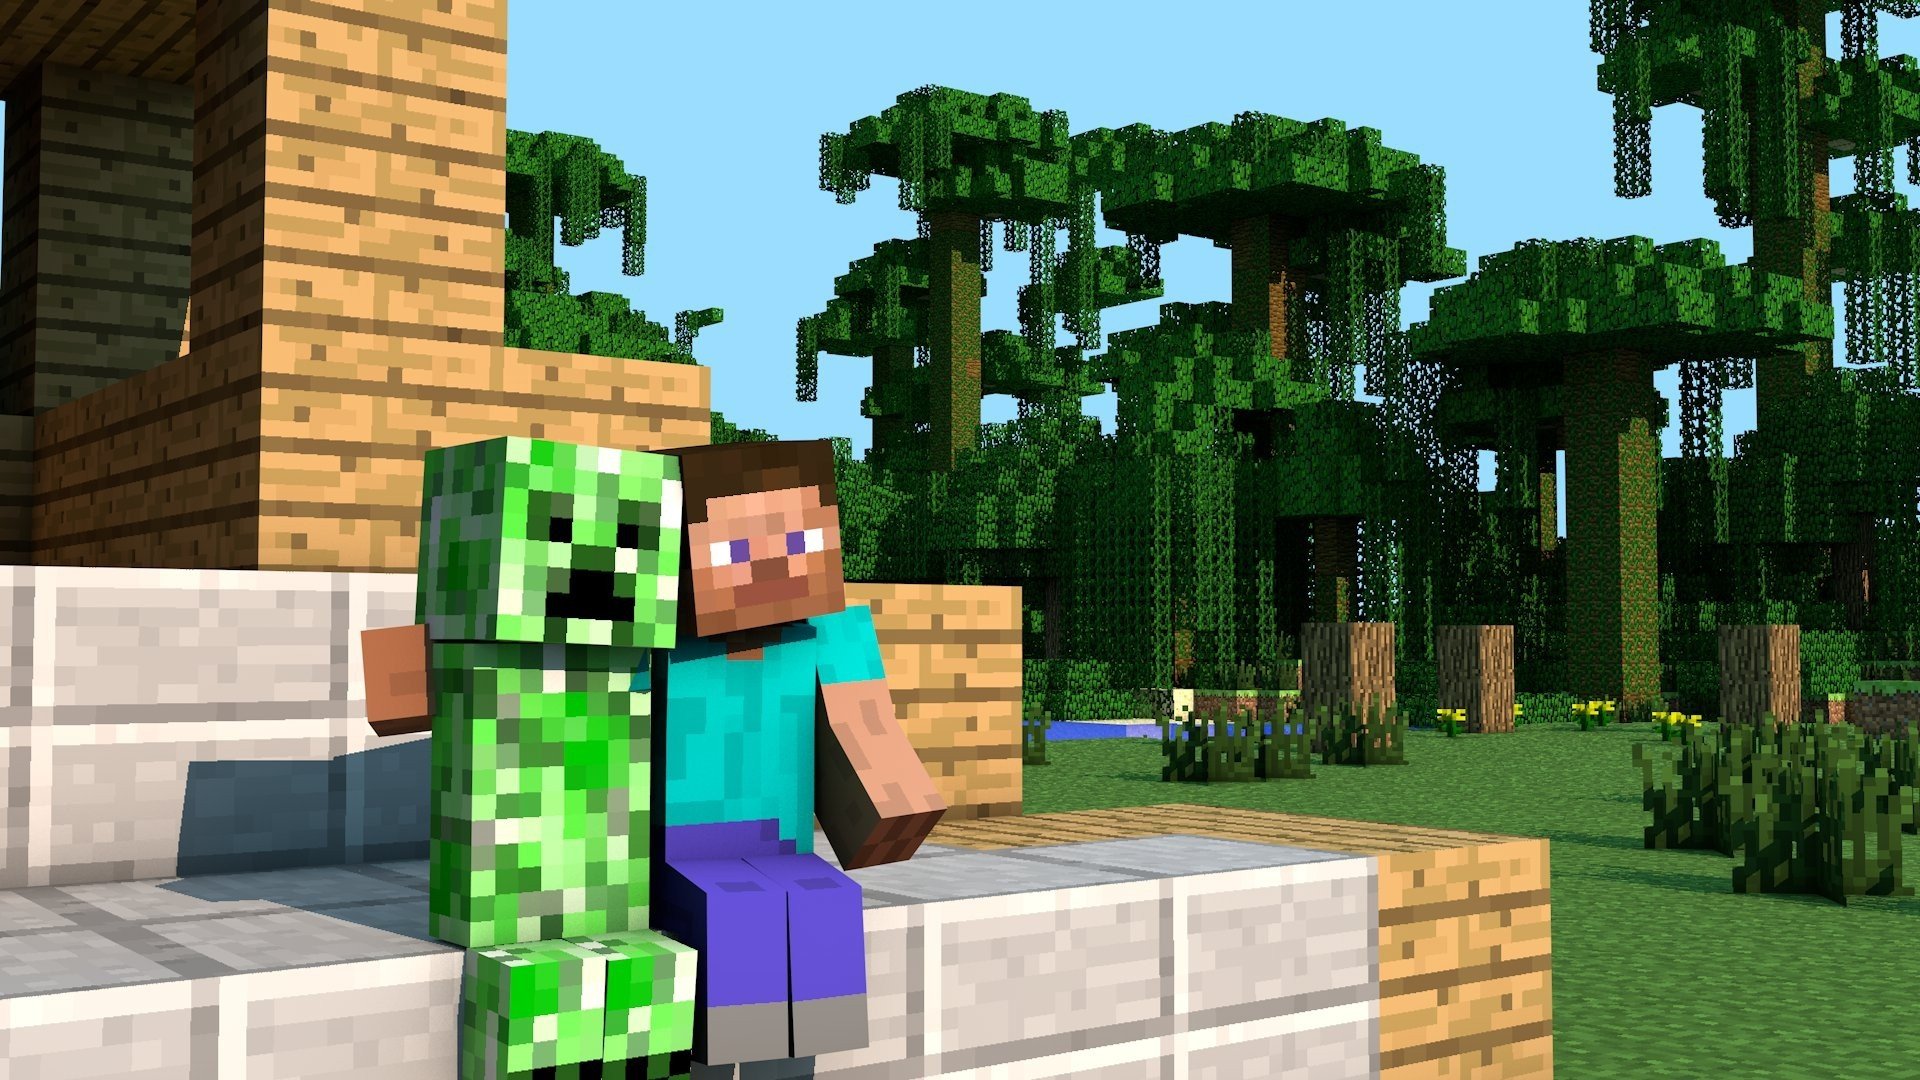 670 Minecraft HD Wallpapers and Backgrounds 1920x1080